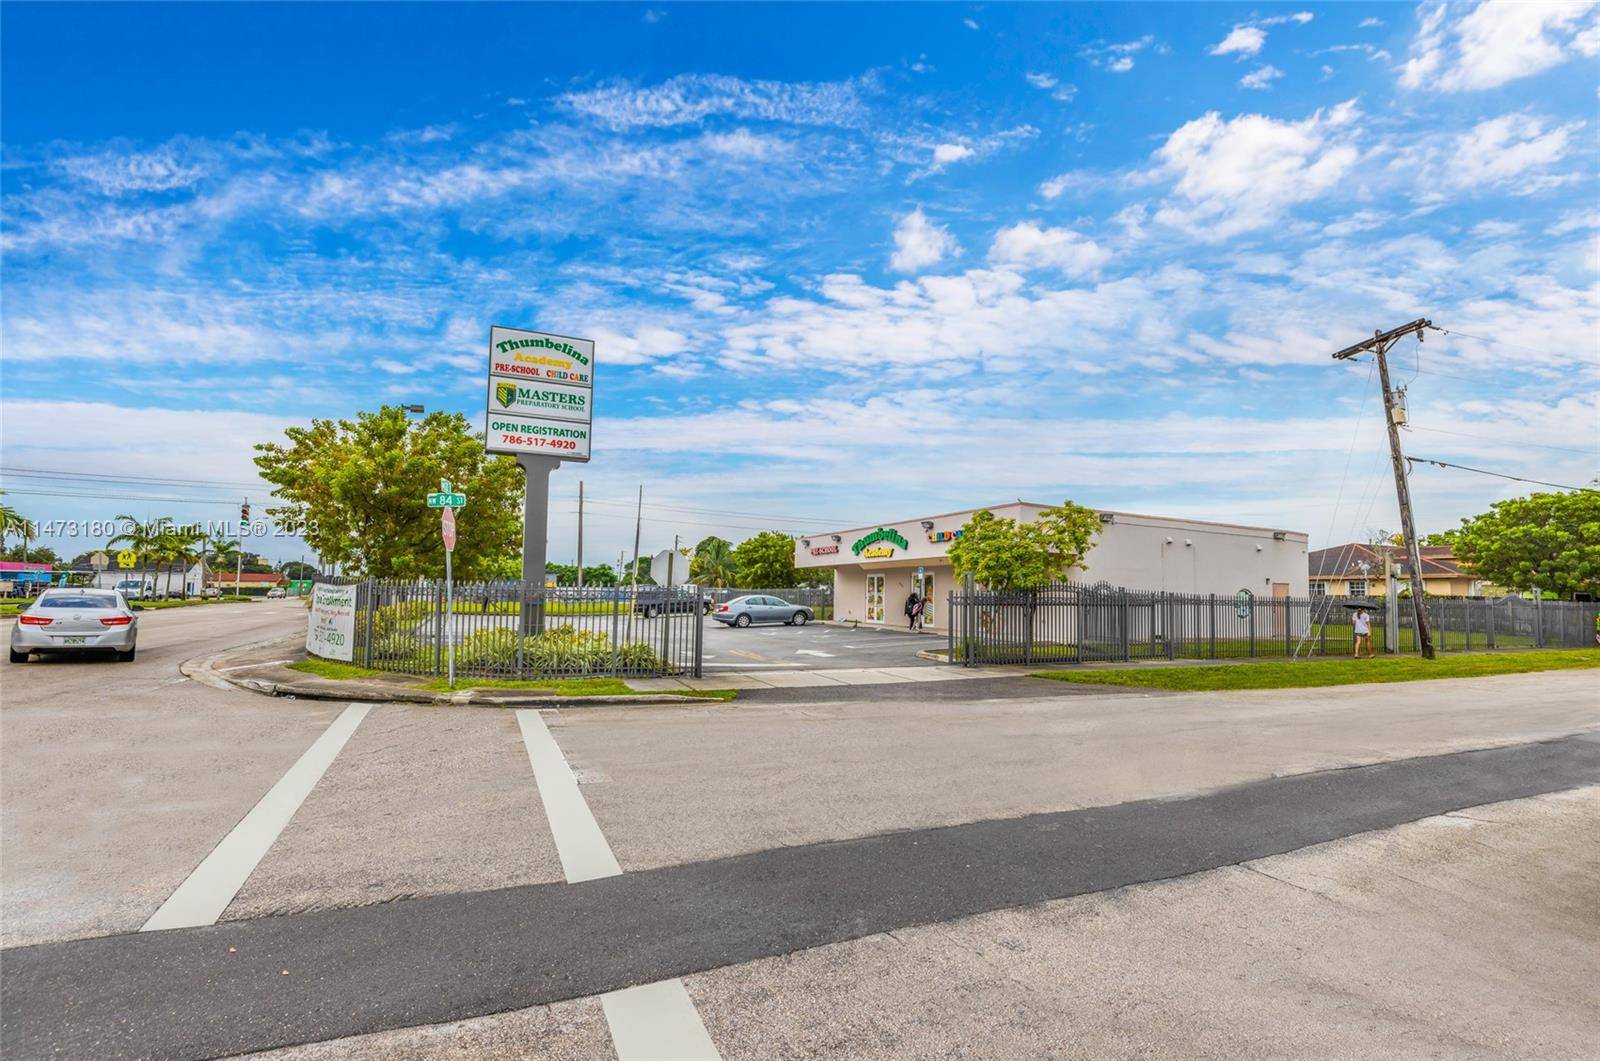 Look no further, unparalleled entire block located in Brownsville, steps away Northwest 79 street, a major east west corridor with an I95 entrance and a direct connection to Miami Beach.